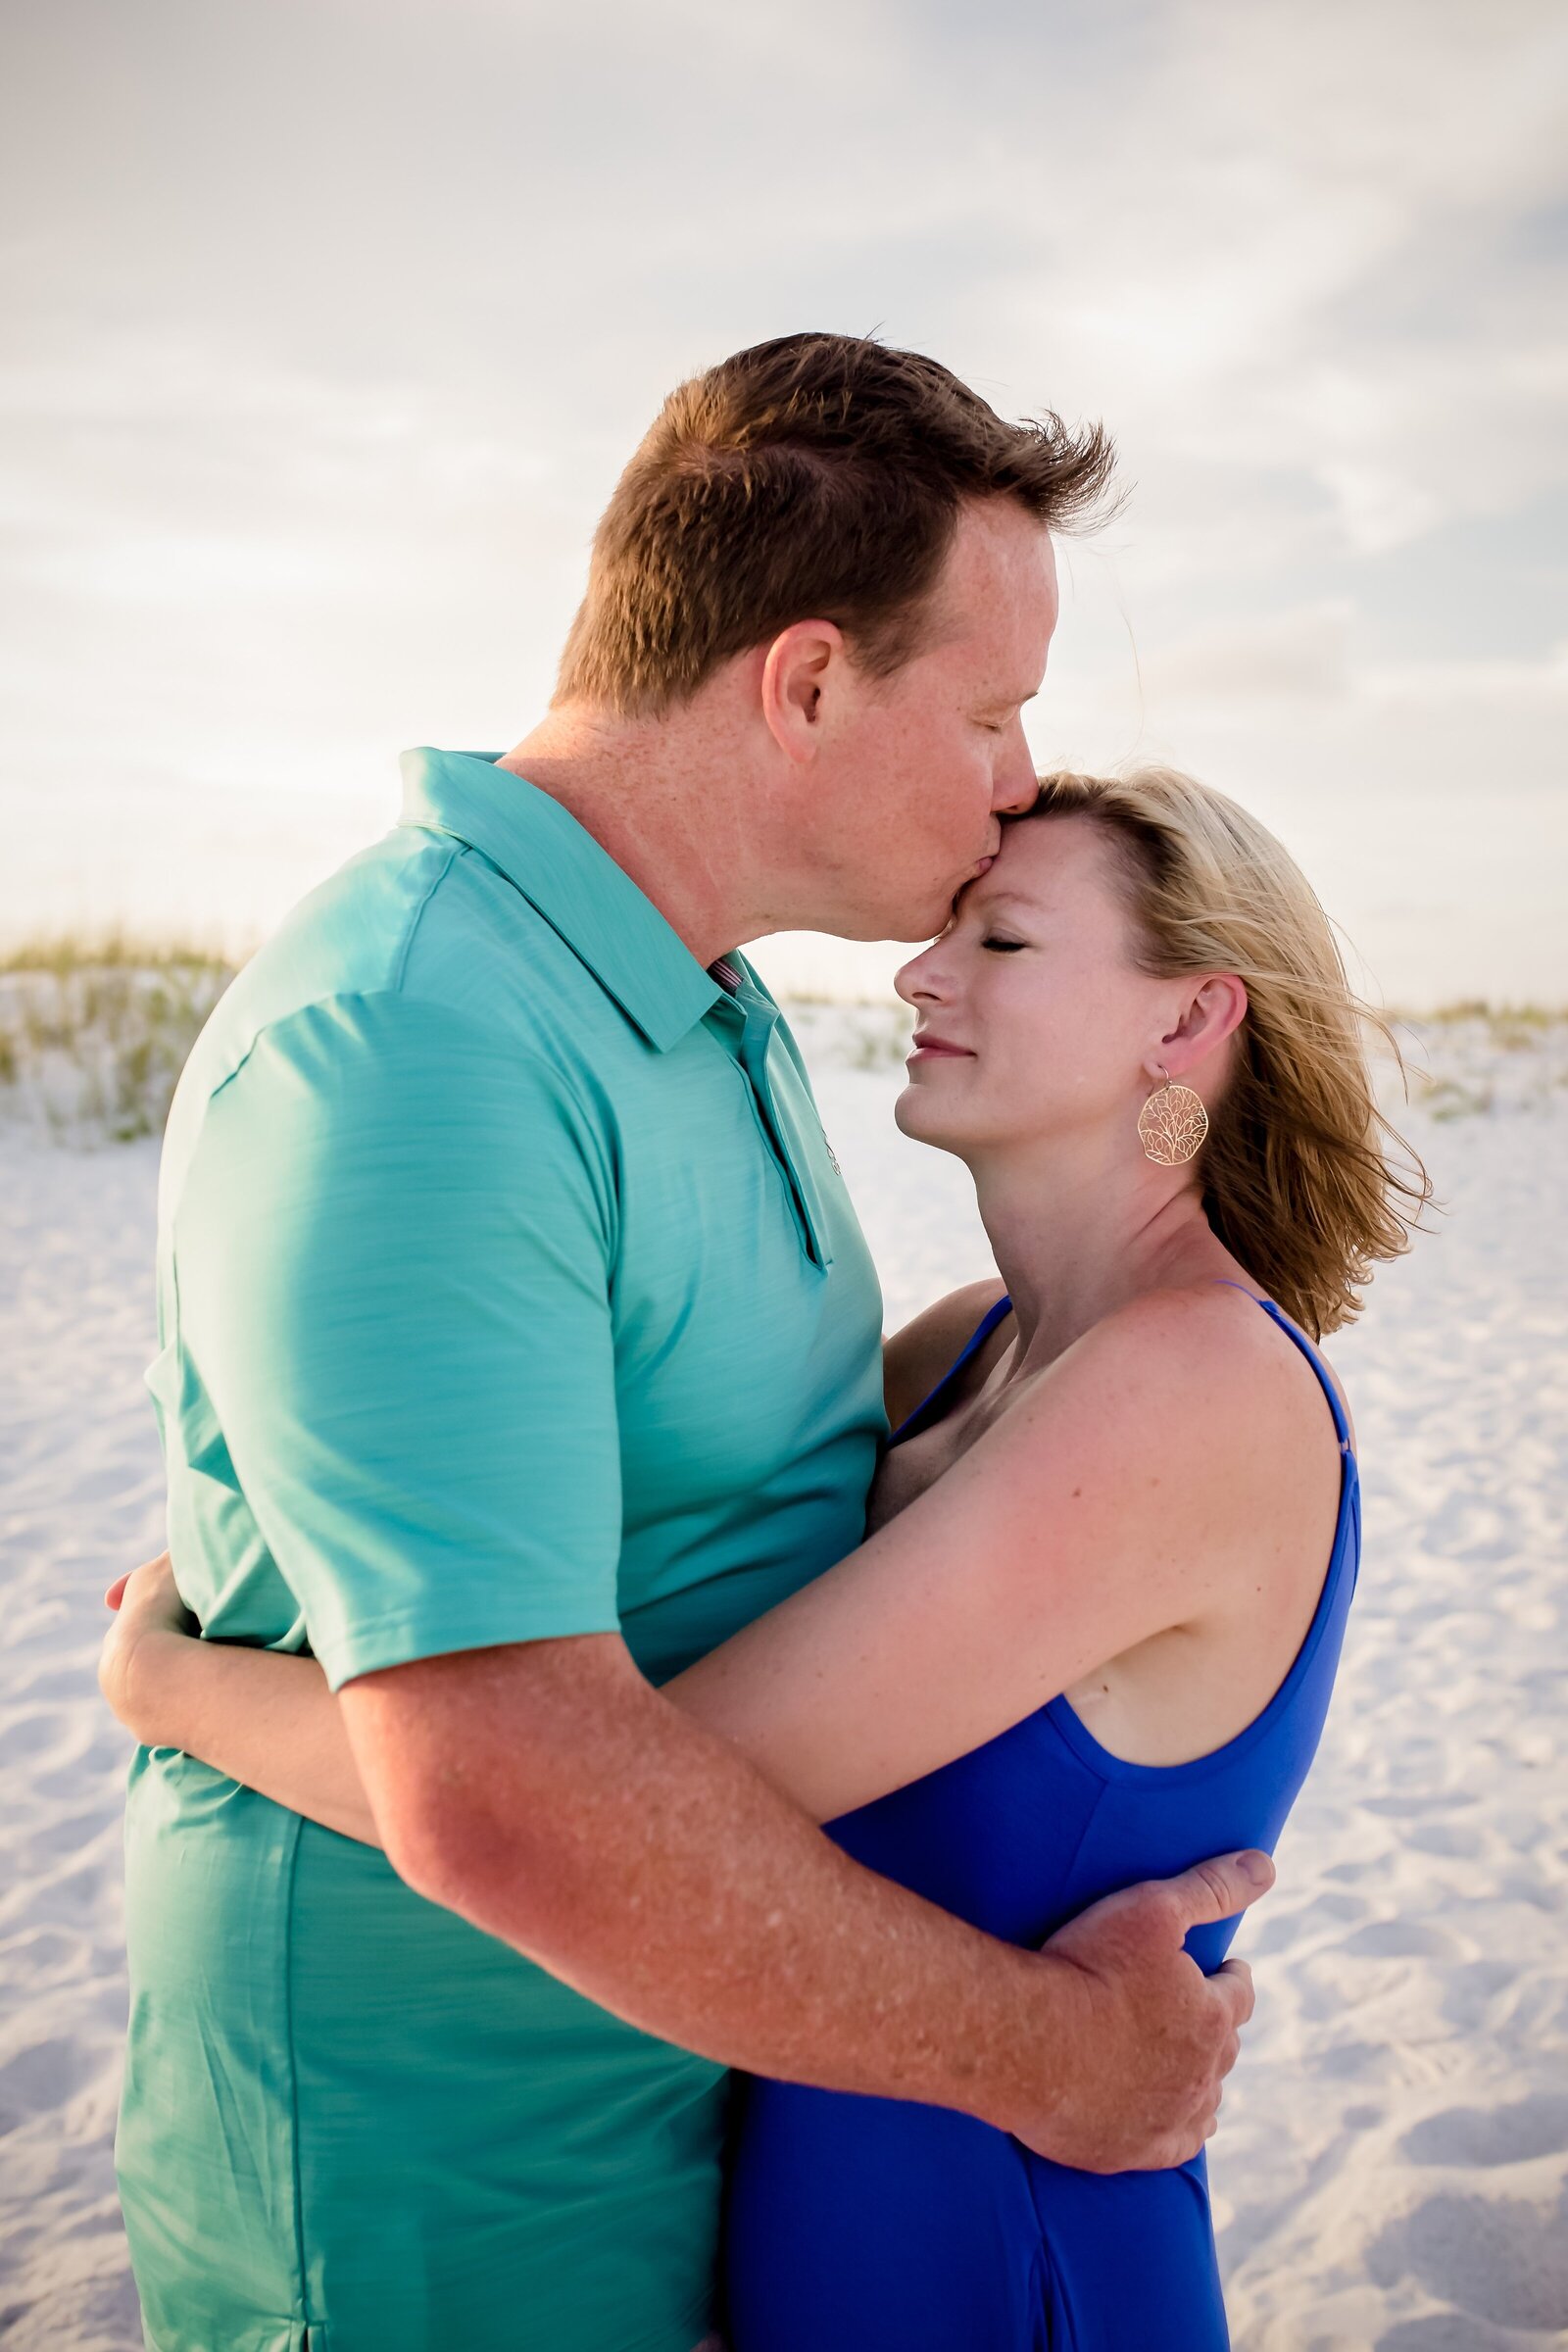 Pensacola Photography session during family vacation on Pensacola Beach . Husband and wife hugging each other at sunset.